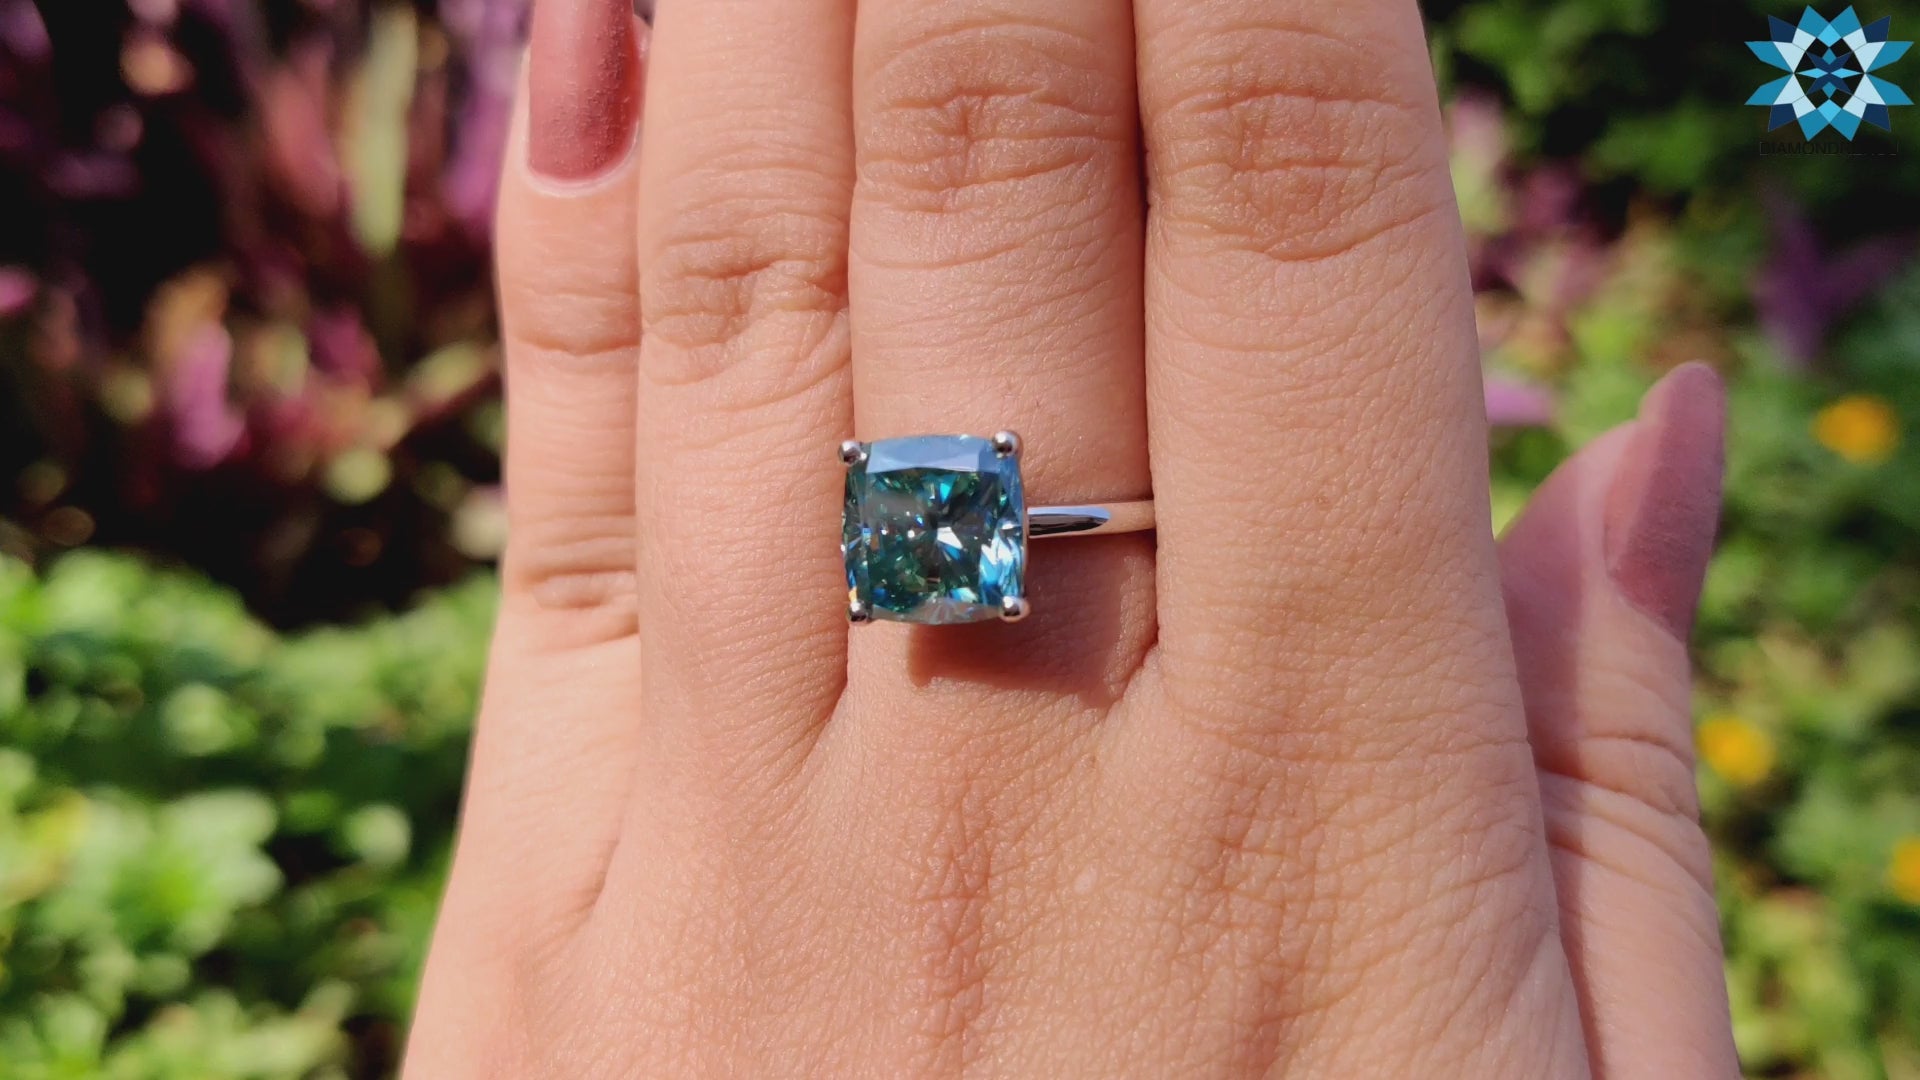 5.13 CT Cushion Cut Moissanite Engagement Ring, Cyan Blue Solitaire Moissanite Ring